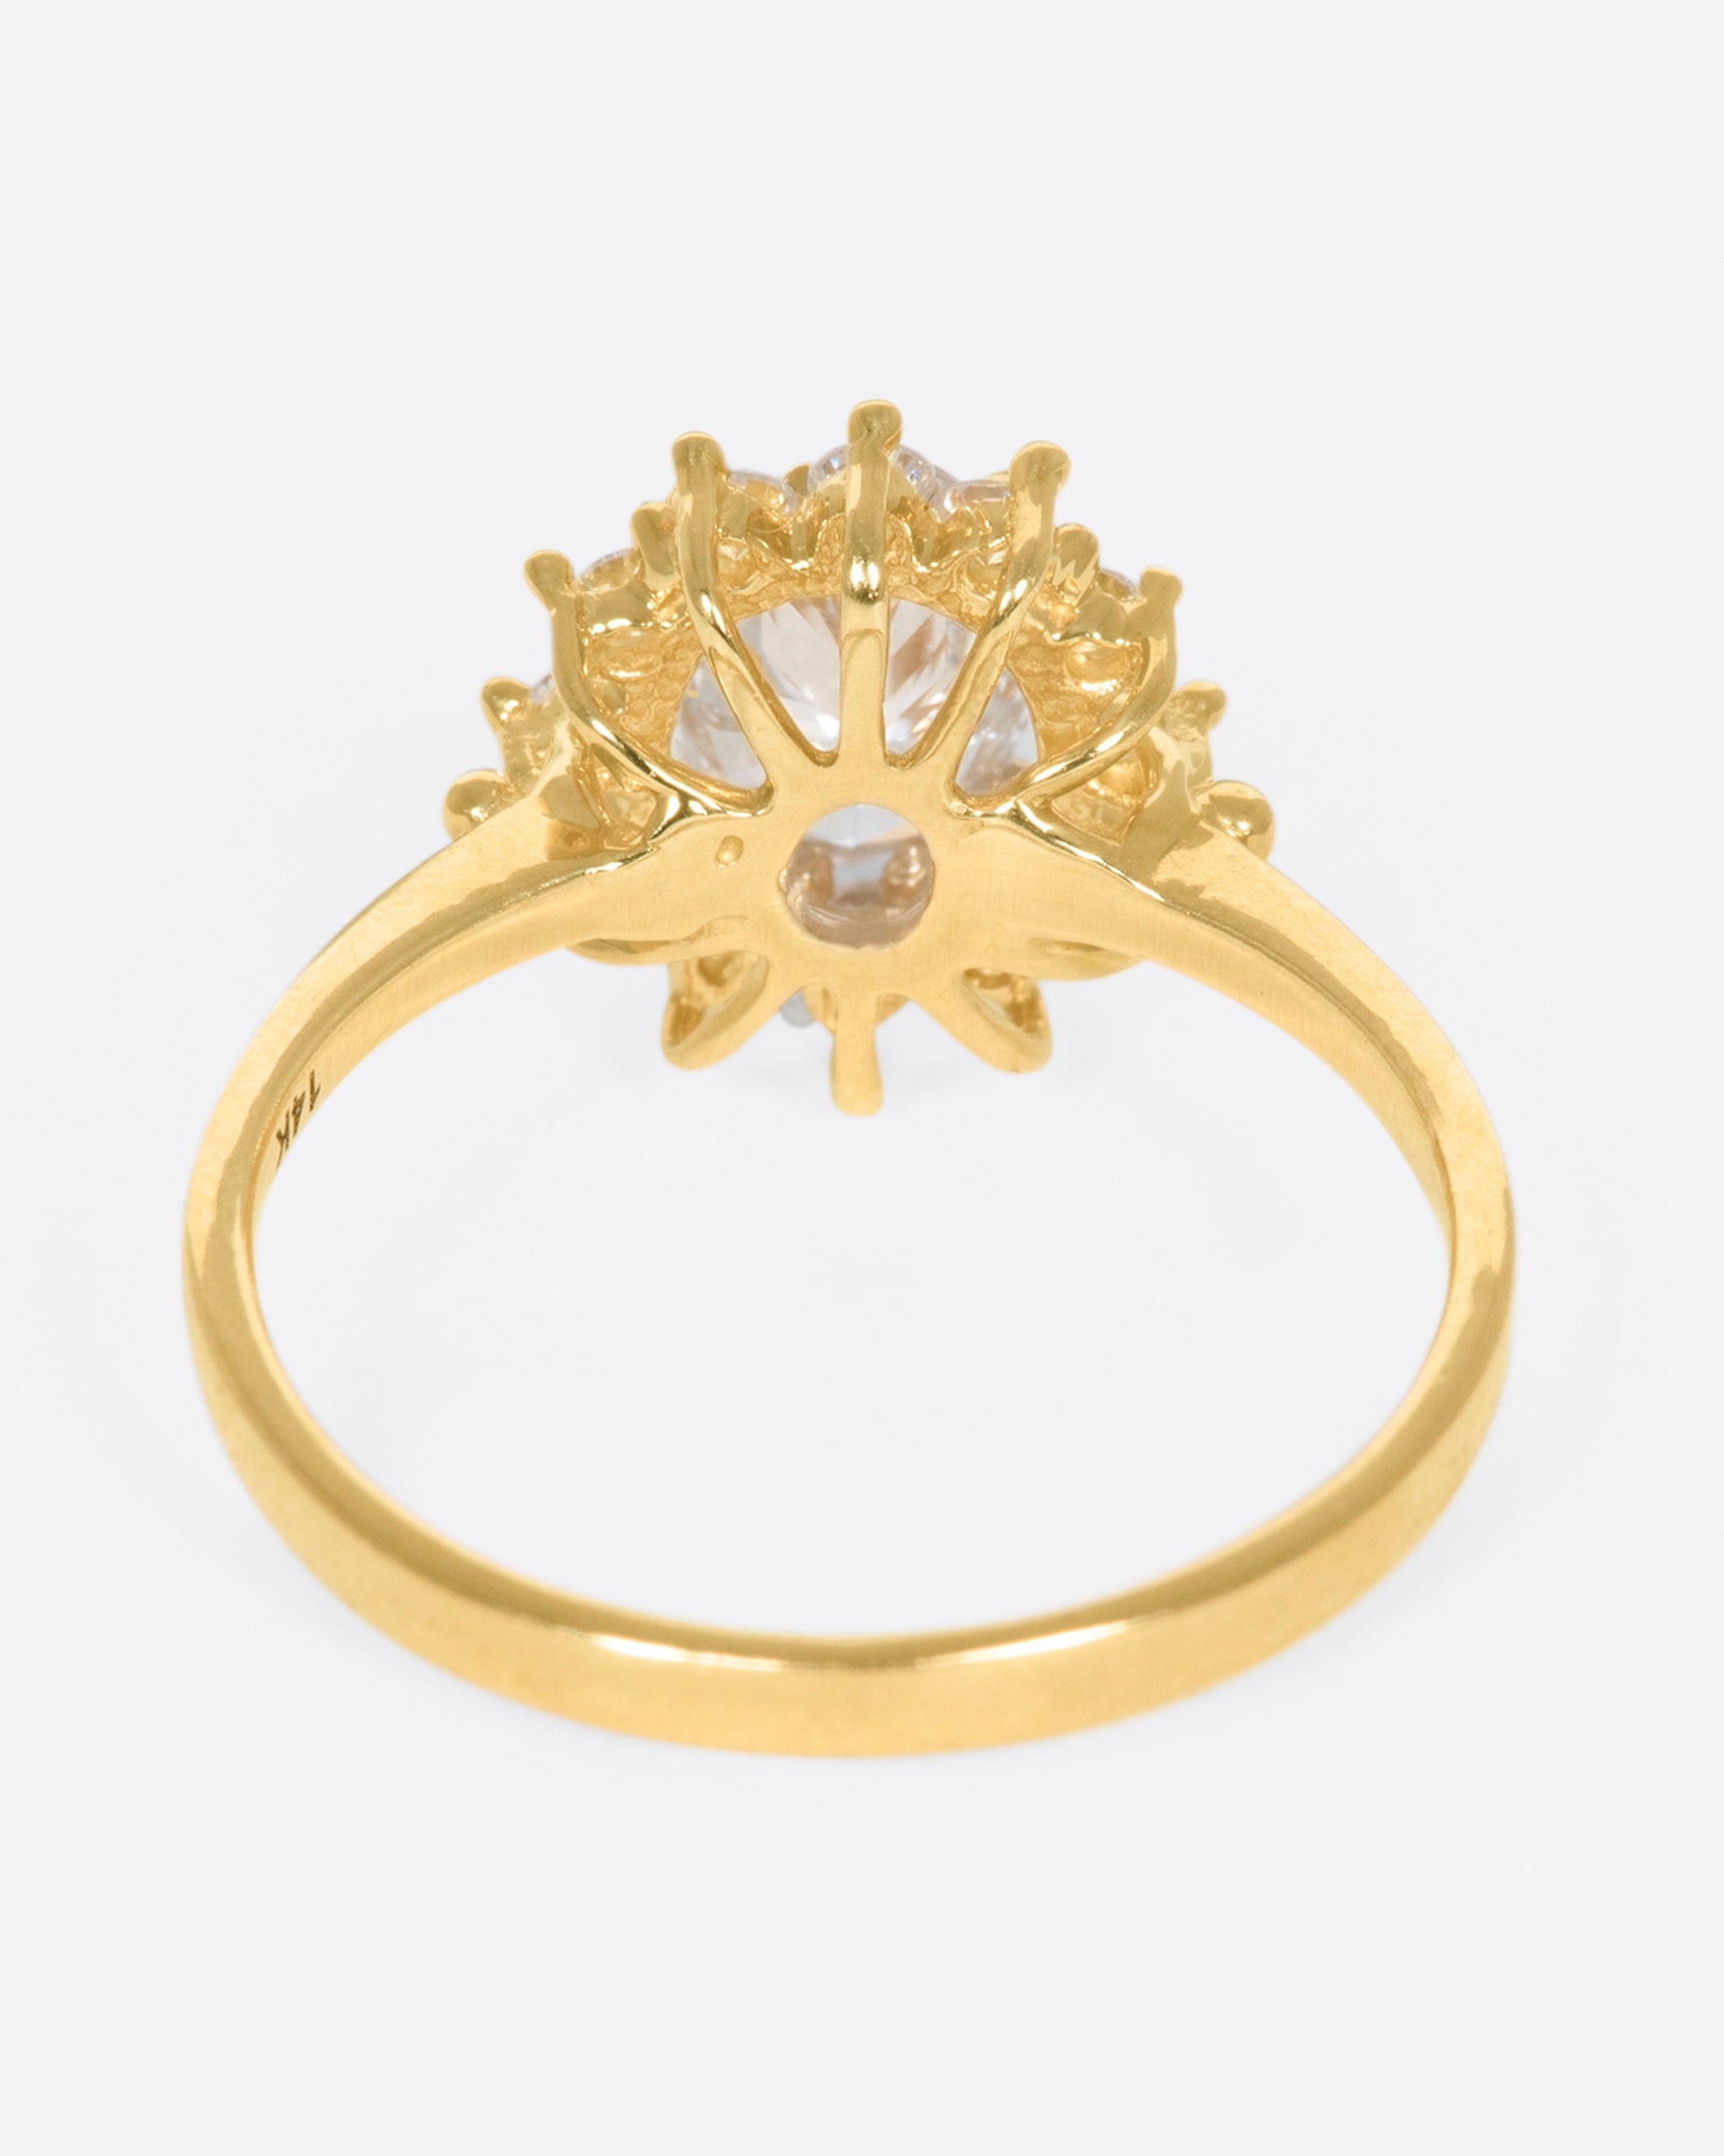 A traditional style engagement ring that feels anything but.